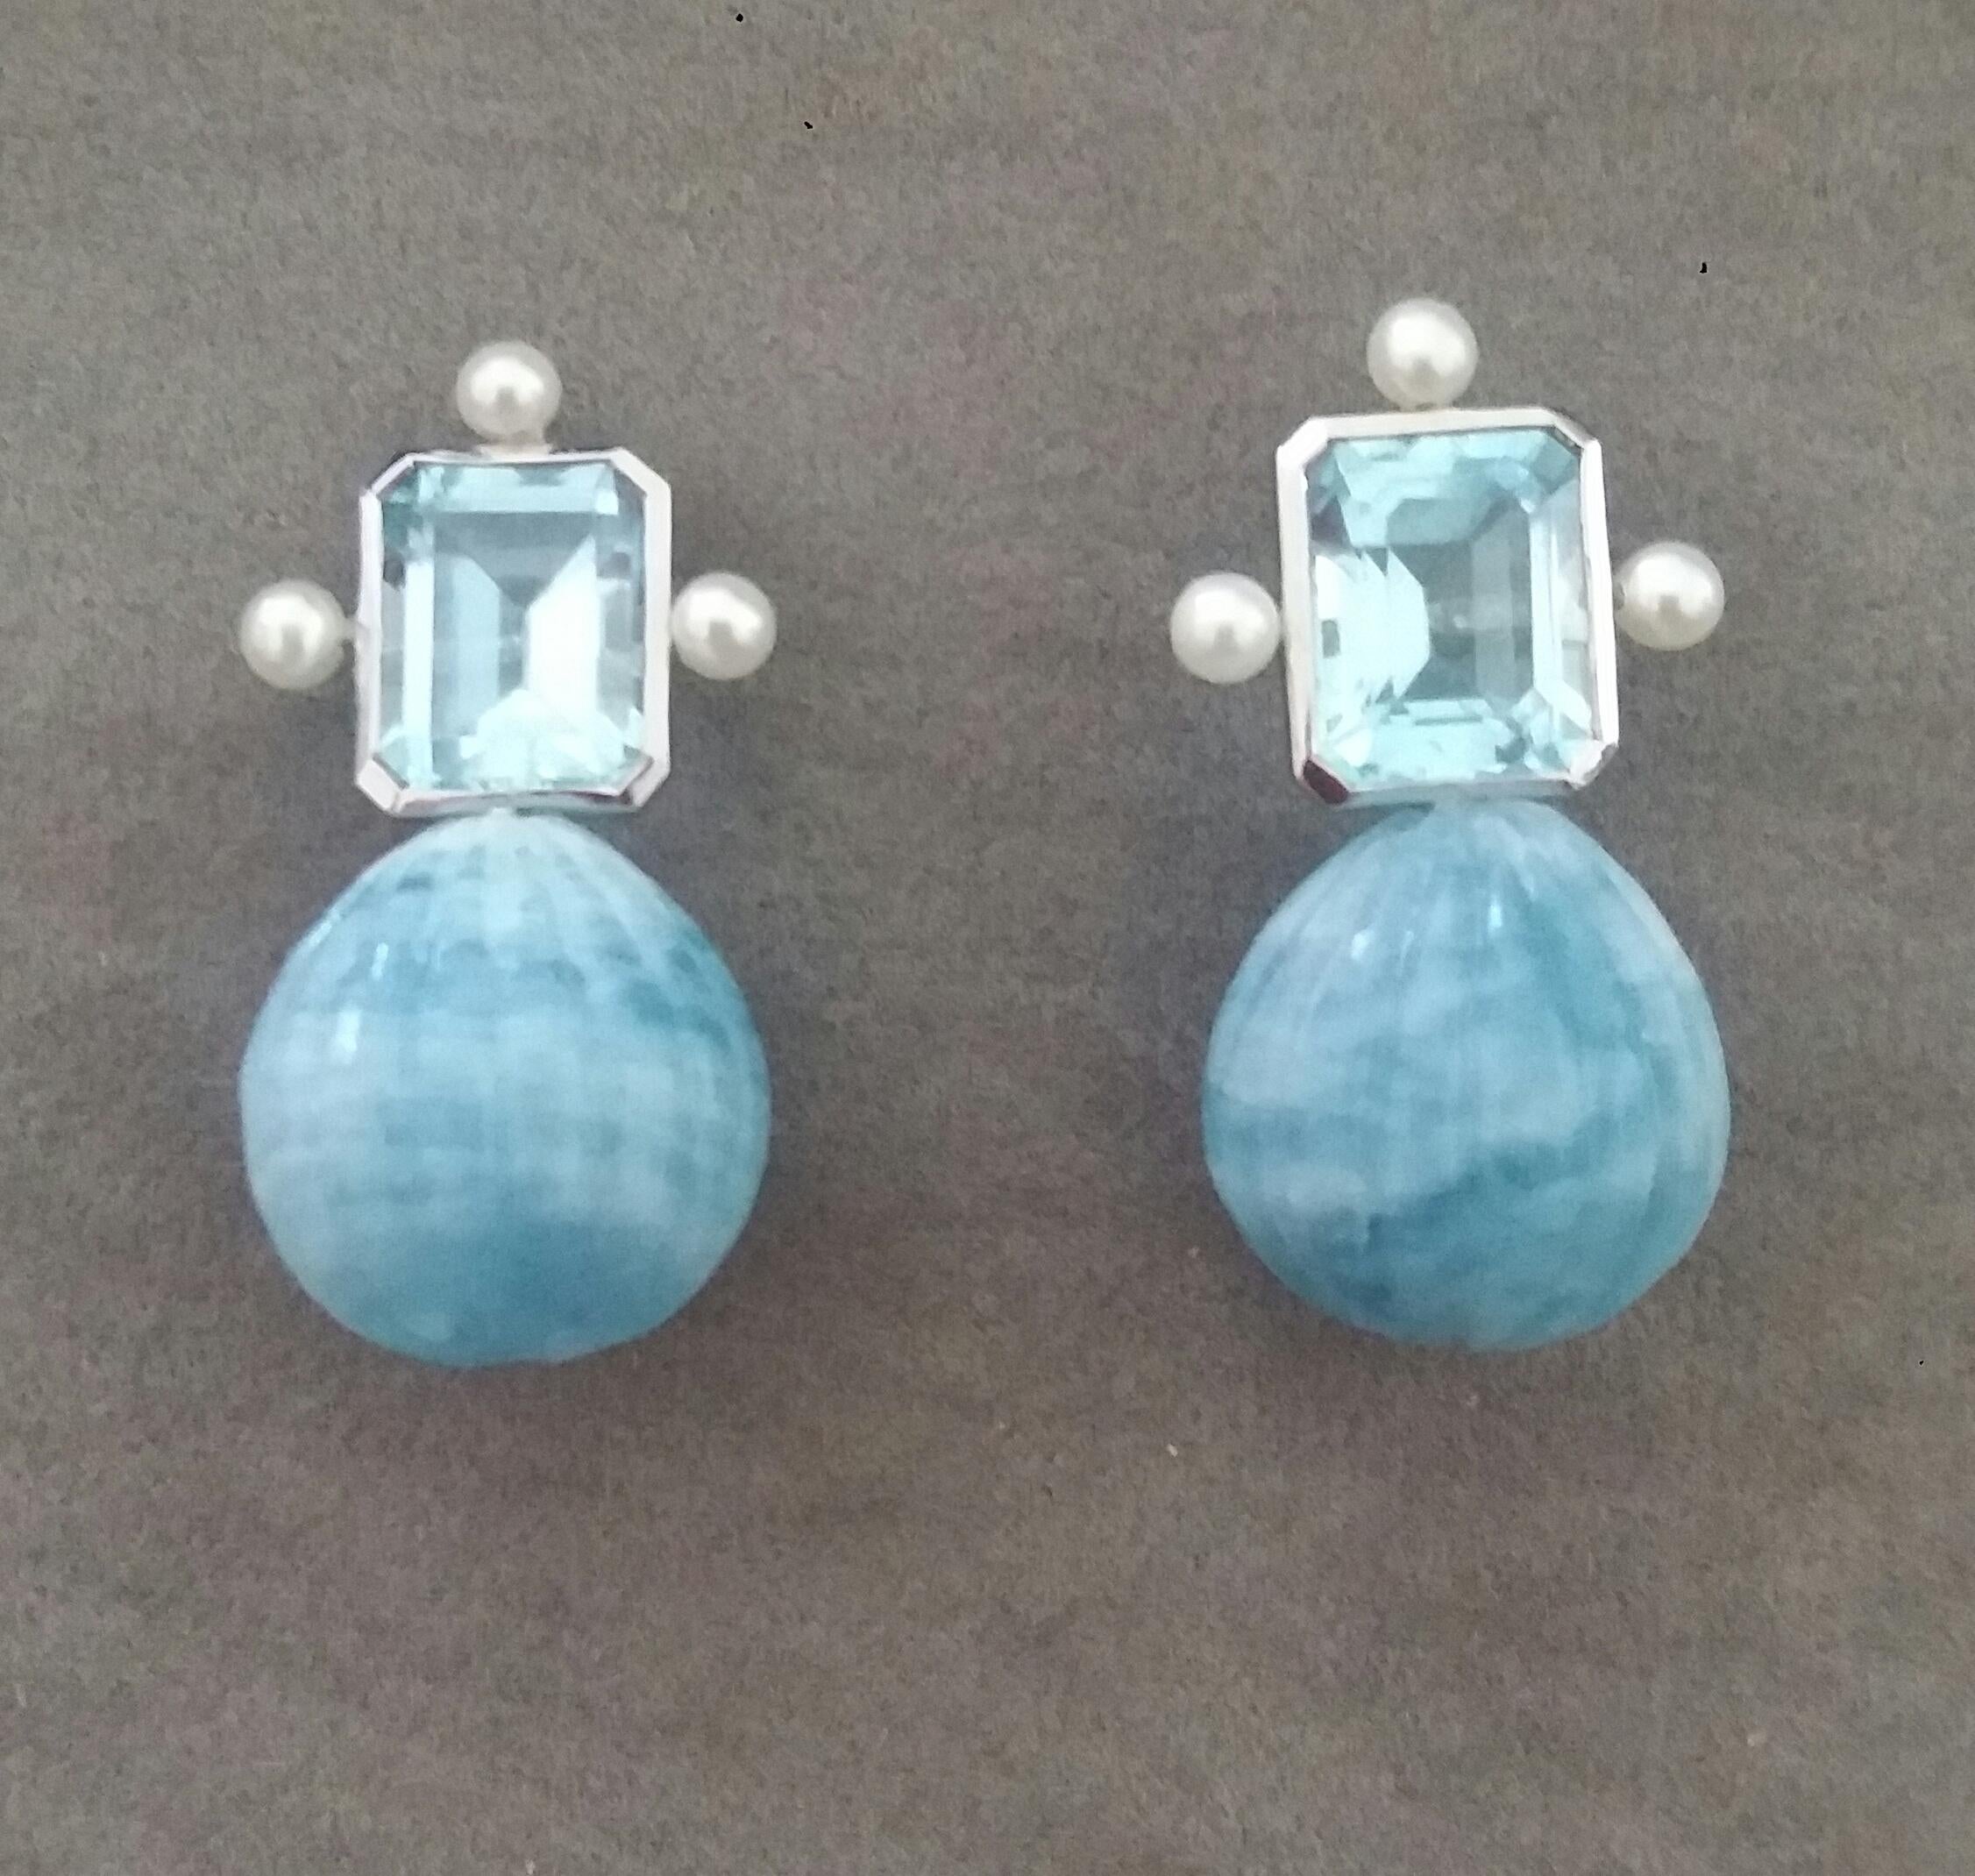 These elegant and handmade earrings have 2 Octagon Faceted Sky Blue Topaz measuring 9 x 11 mm set in a 14 Kt white gold bezel with 3 small round pearls of 4mm on 3 sides at the top to which are suspended 2 Engraved Natural Aquamarine  Round Drops